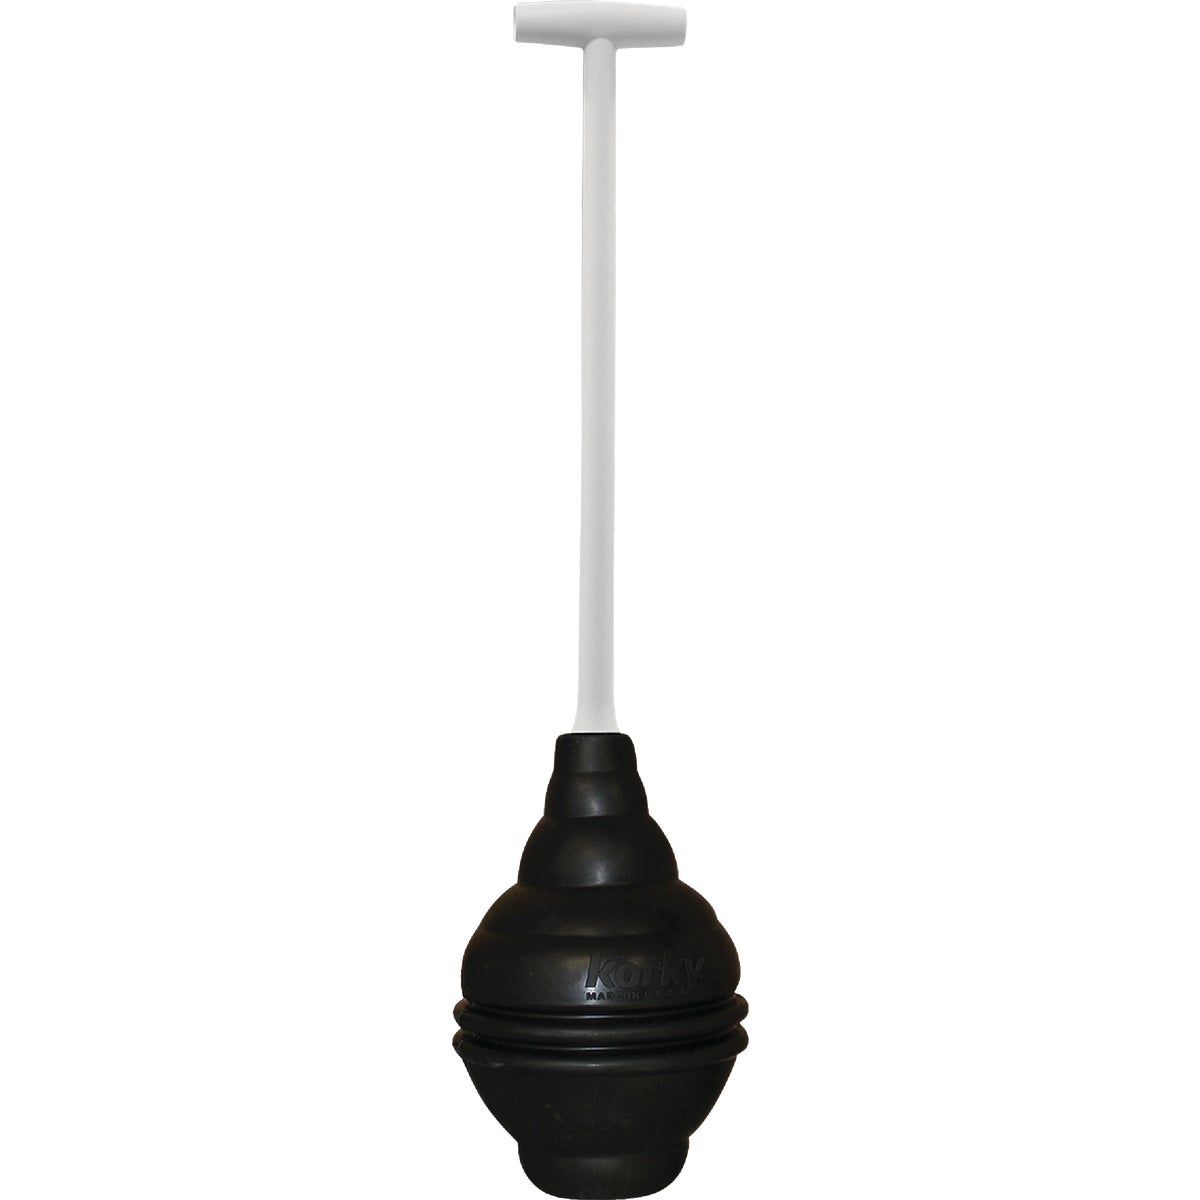 Item 401368, The BEEHIVE Max Toilet Plunger is the first plunger designed to fit both 